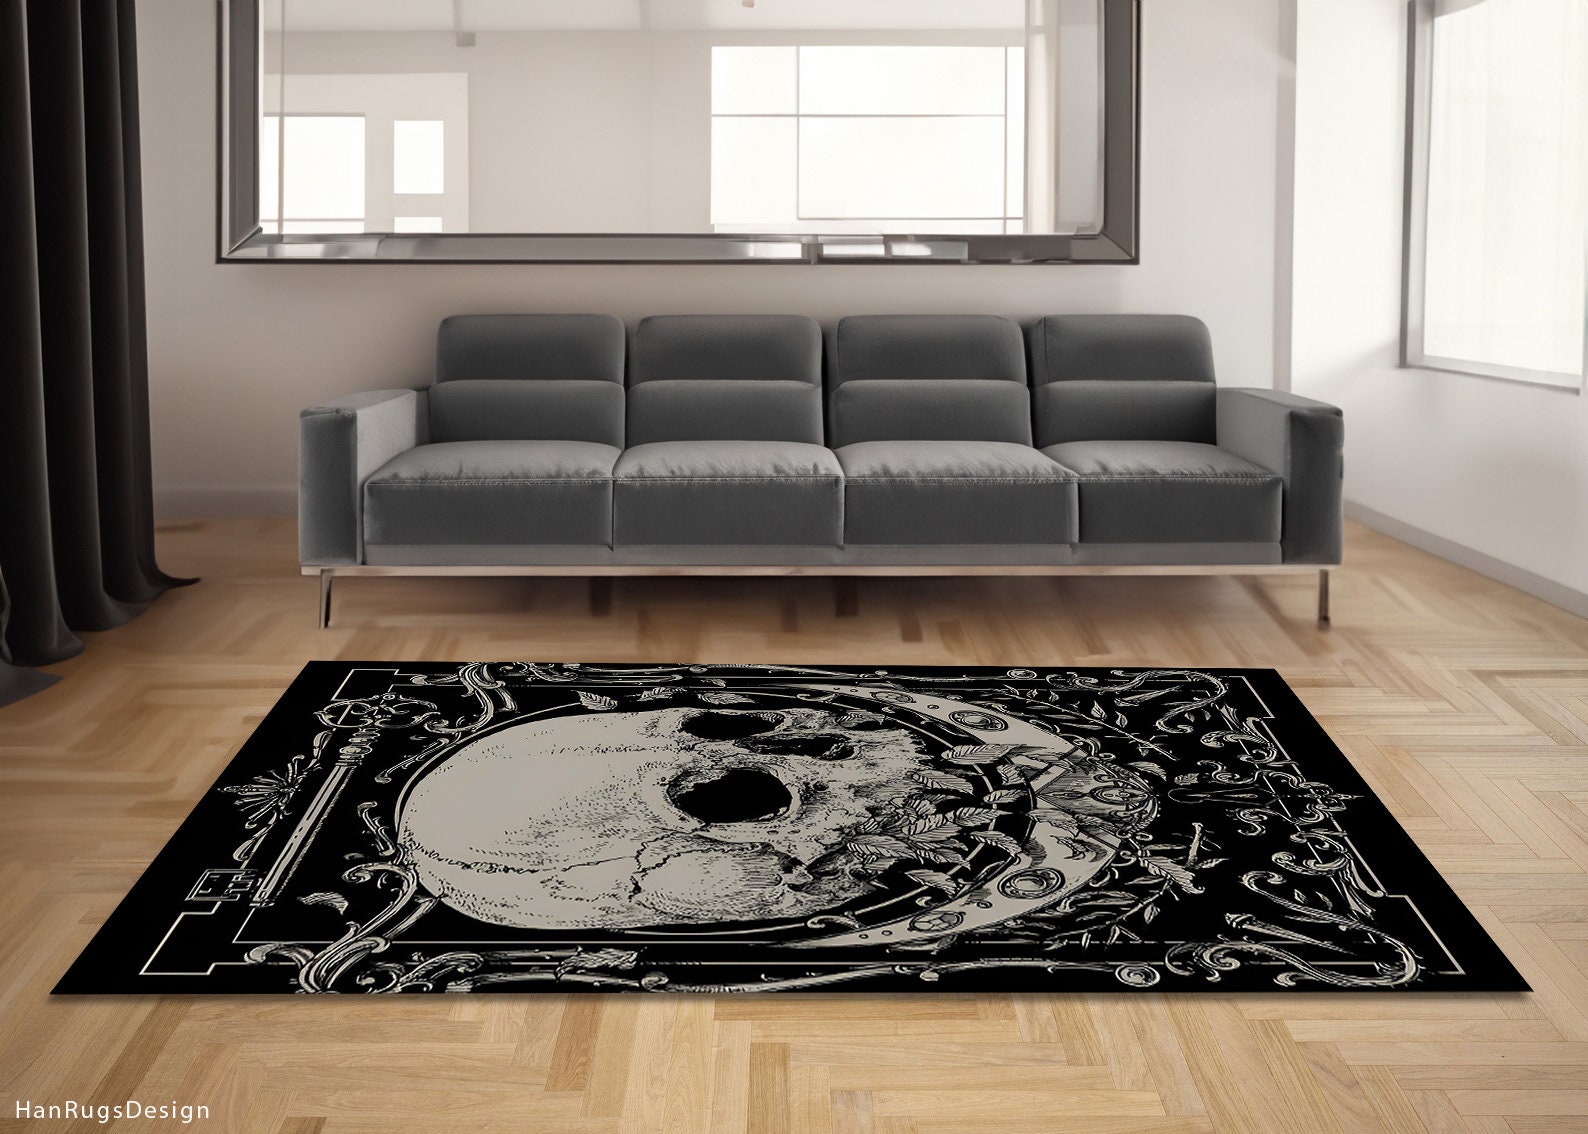 Discover Premium Skull Rug,Handmade Black and Gray Abstract Rug for Stylish Home,Trendy Skull Themed Home Decor Carpet,Unique Gothic Design Floor Mat